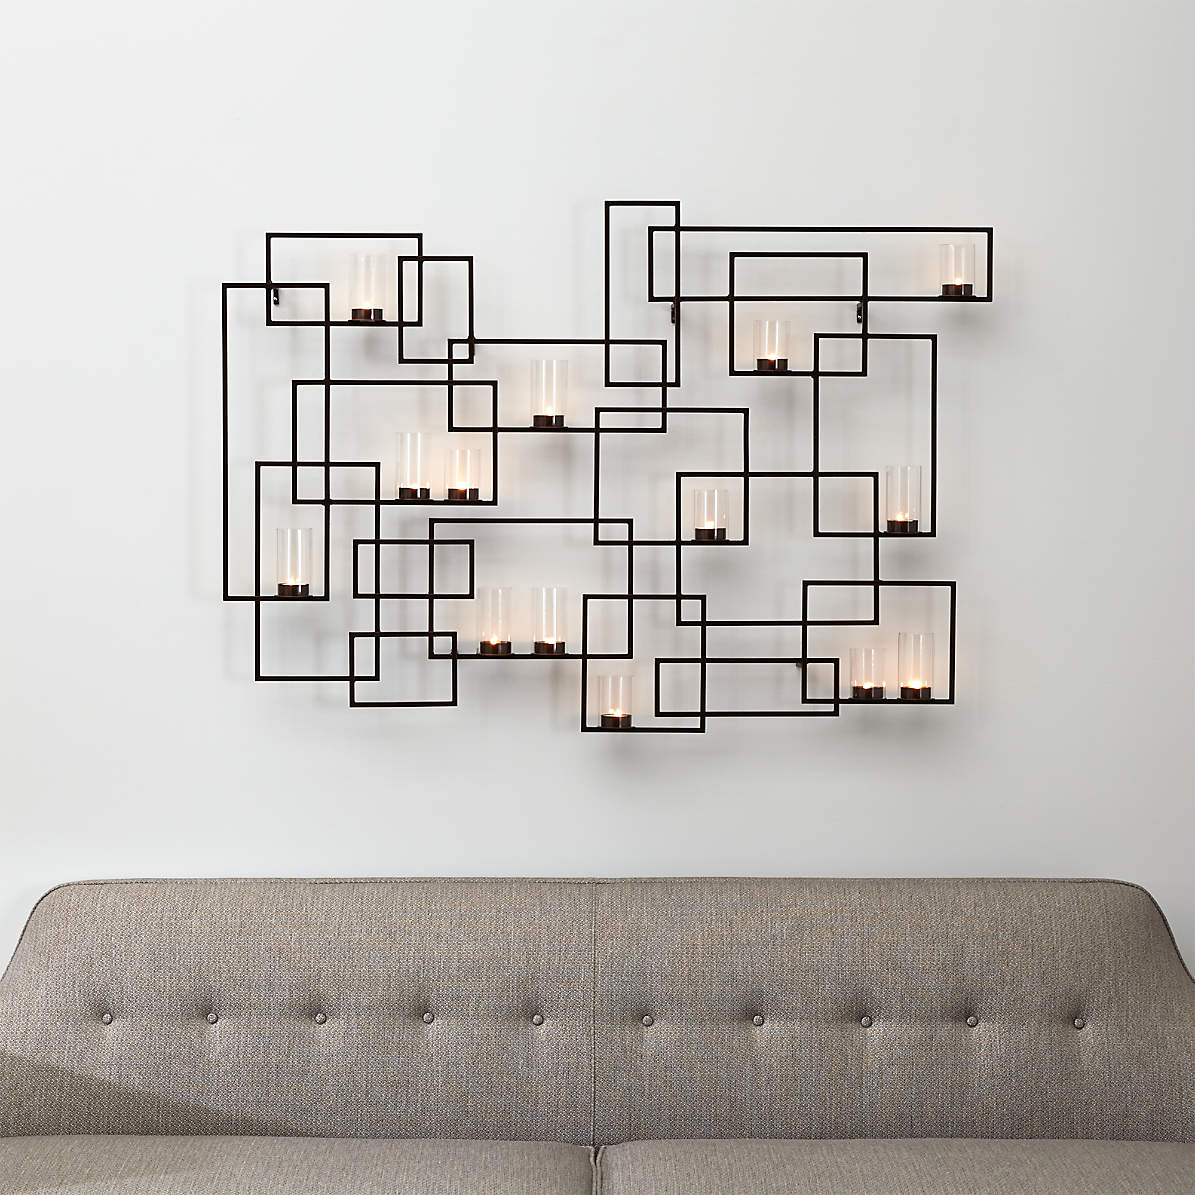 Circuit Bronze Metal Wall Candle Holder, Circular Metal Wall Tealight Candle Holder